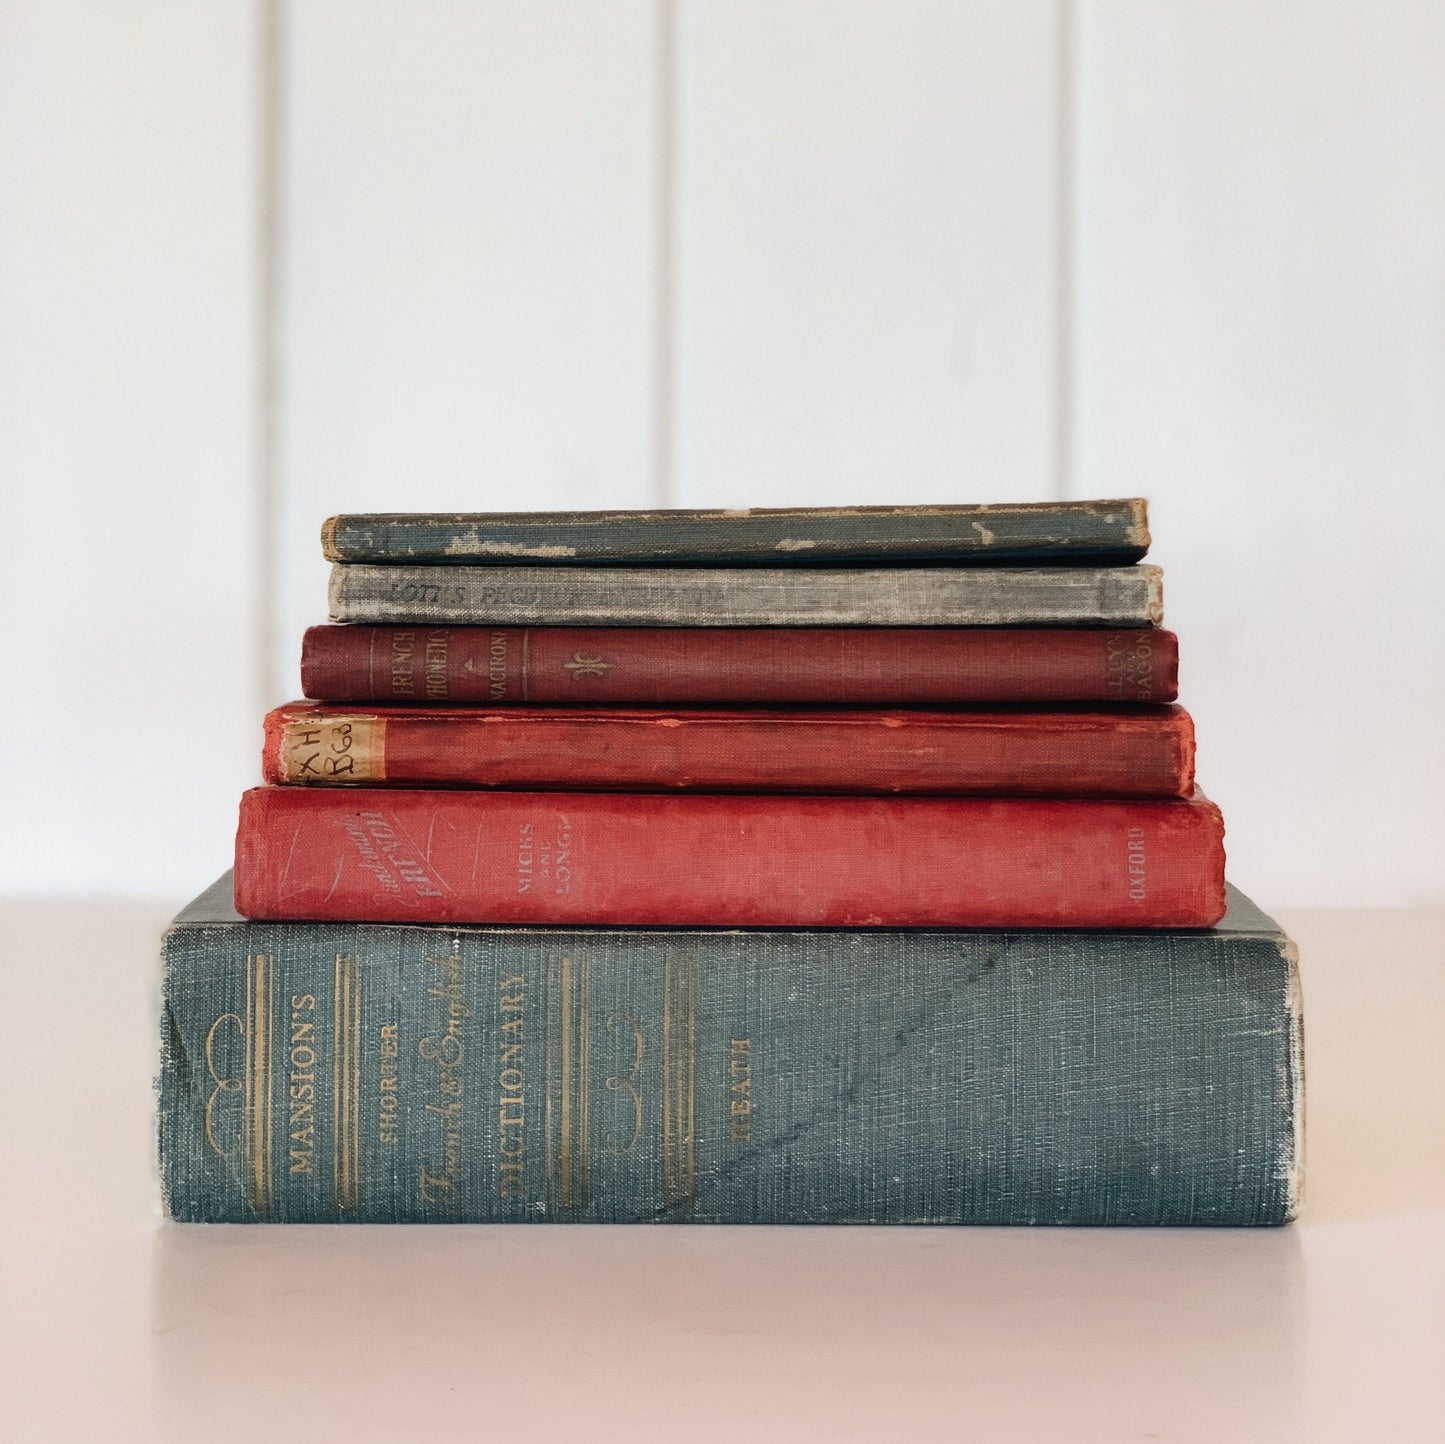 Vintage French Books, Old Red and Blue Books, French Language Book Bundle